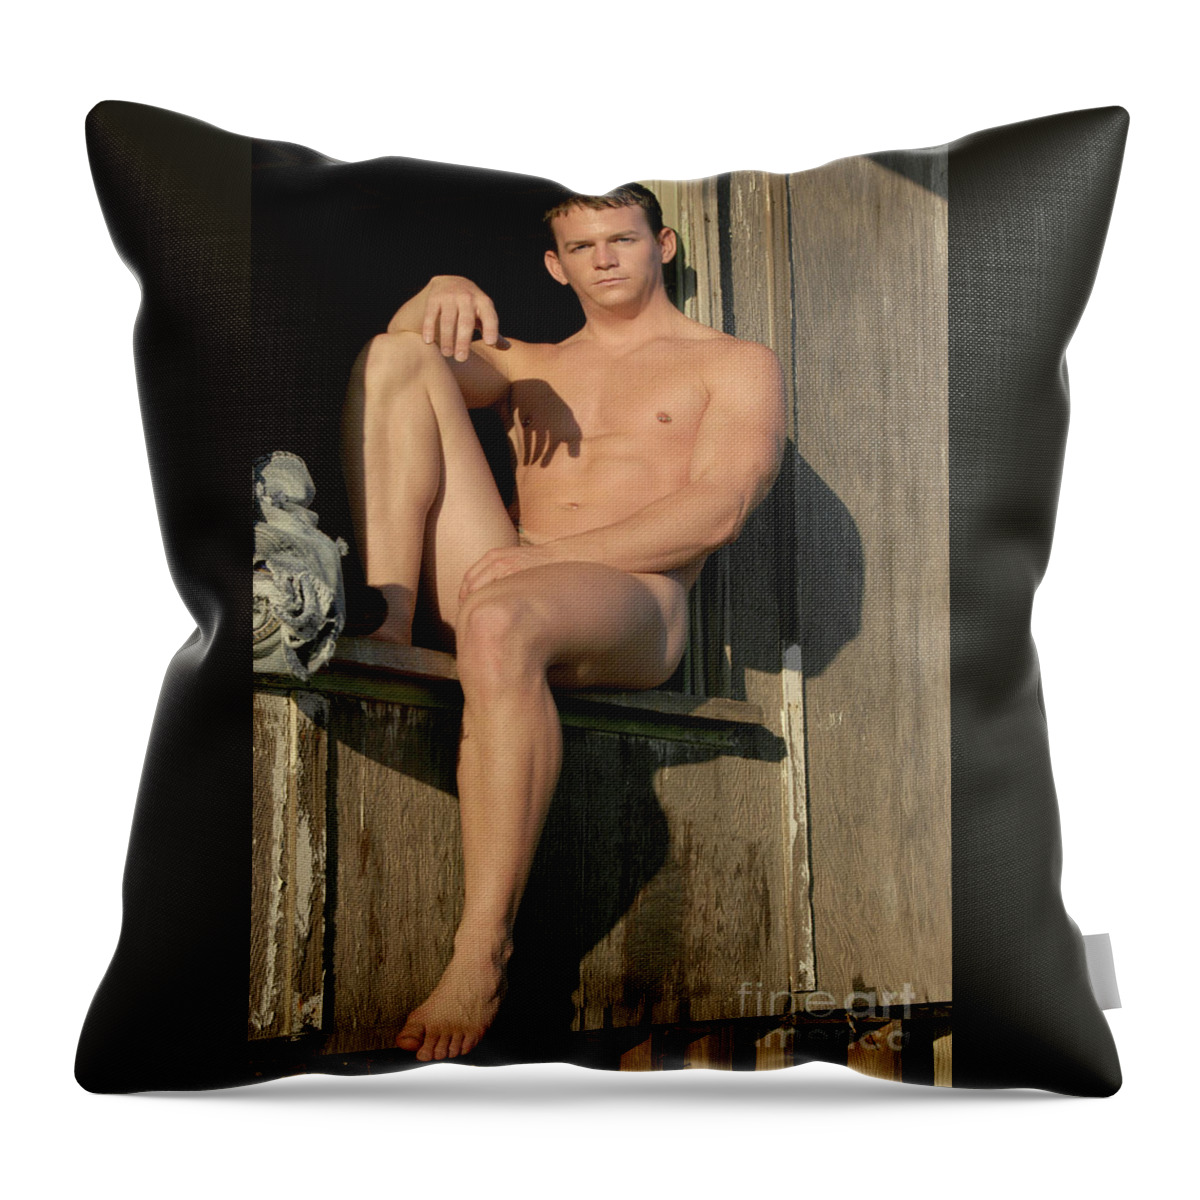 Young Throw Pillow featuring the photograph Young nude male poses in barn window. by Gunther Allen